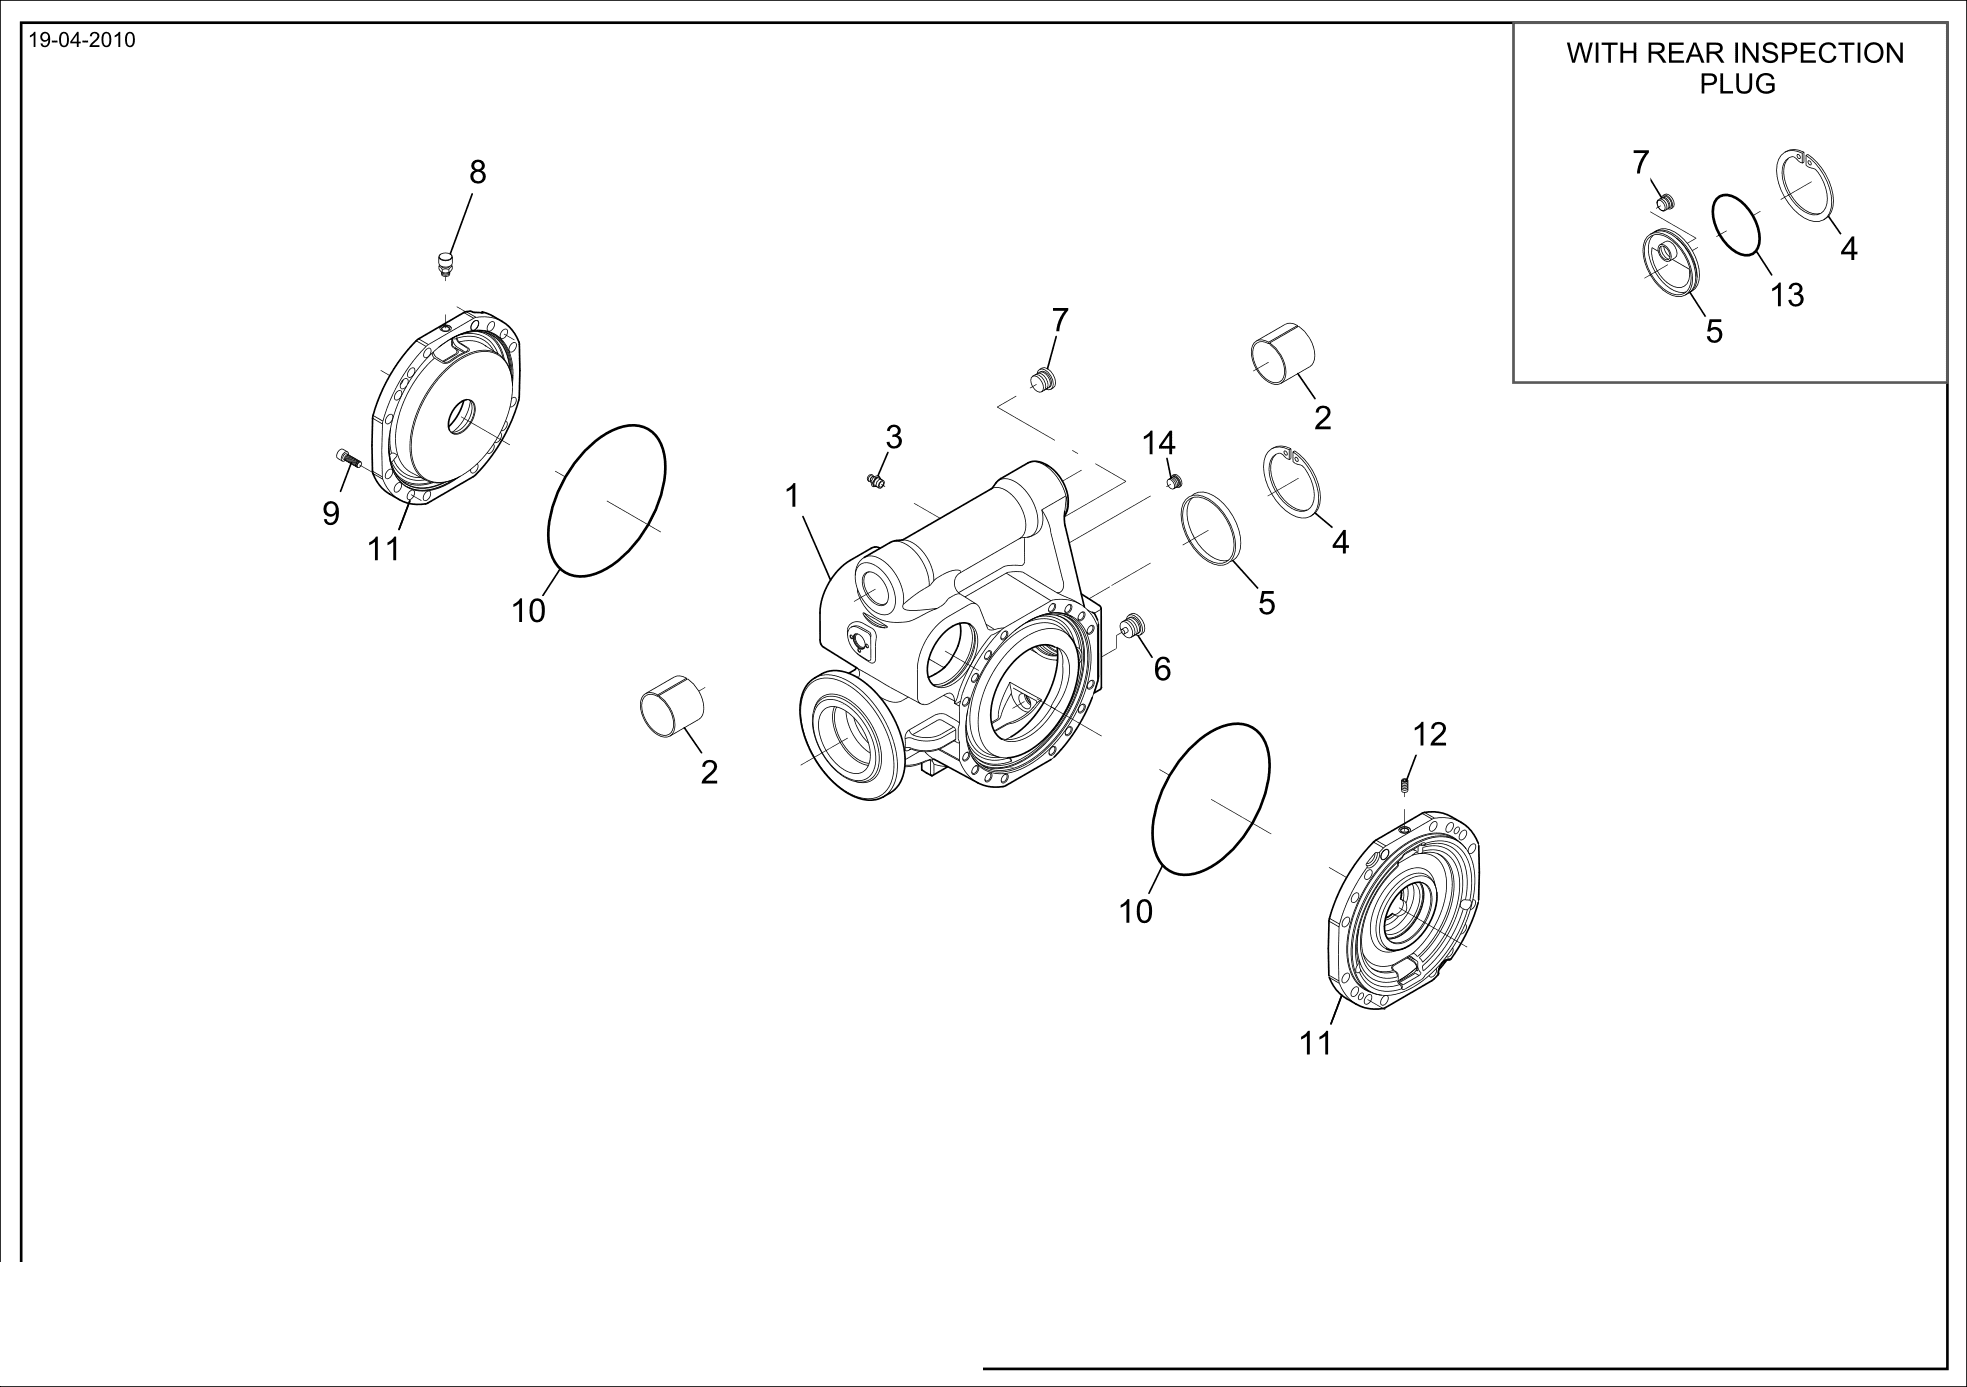 drawing for WEILER 6563 - VENT (figure 1)